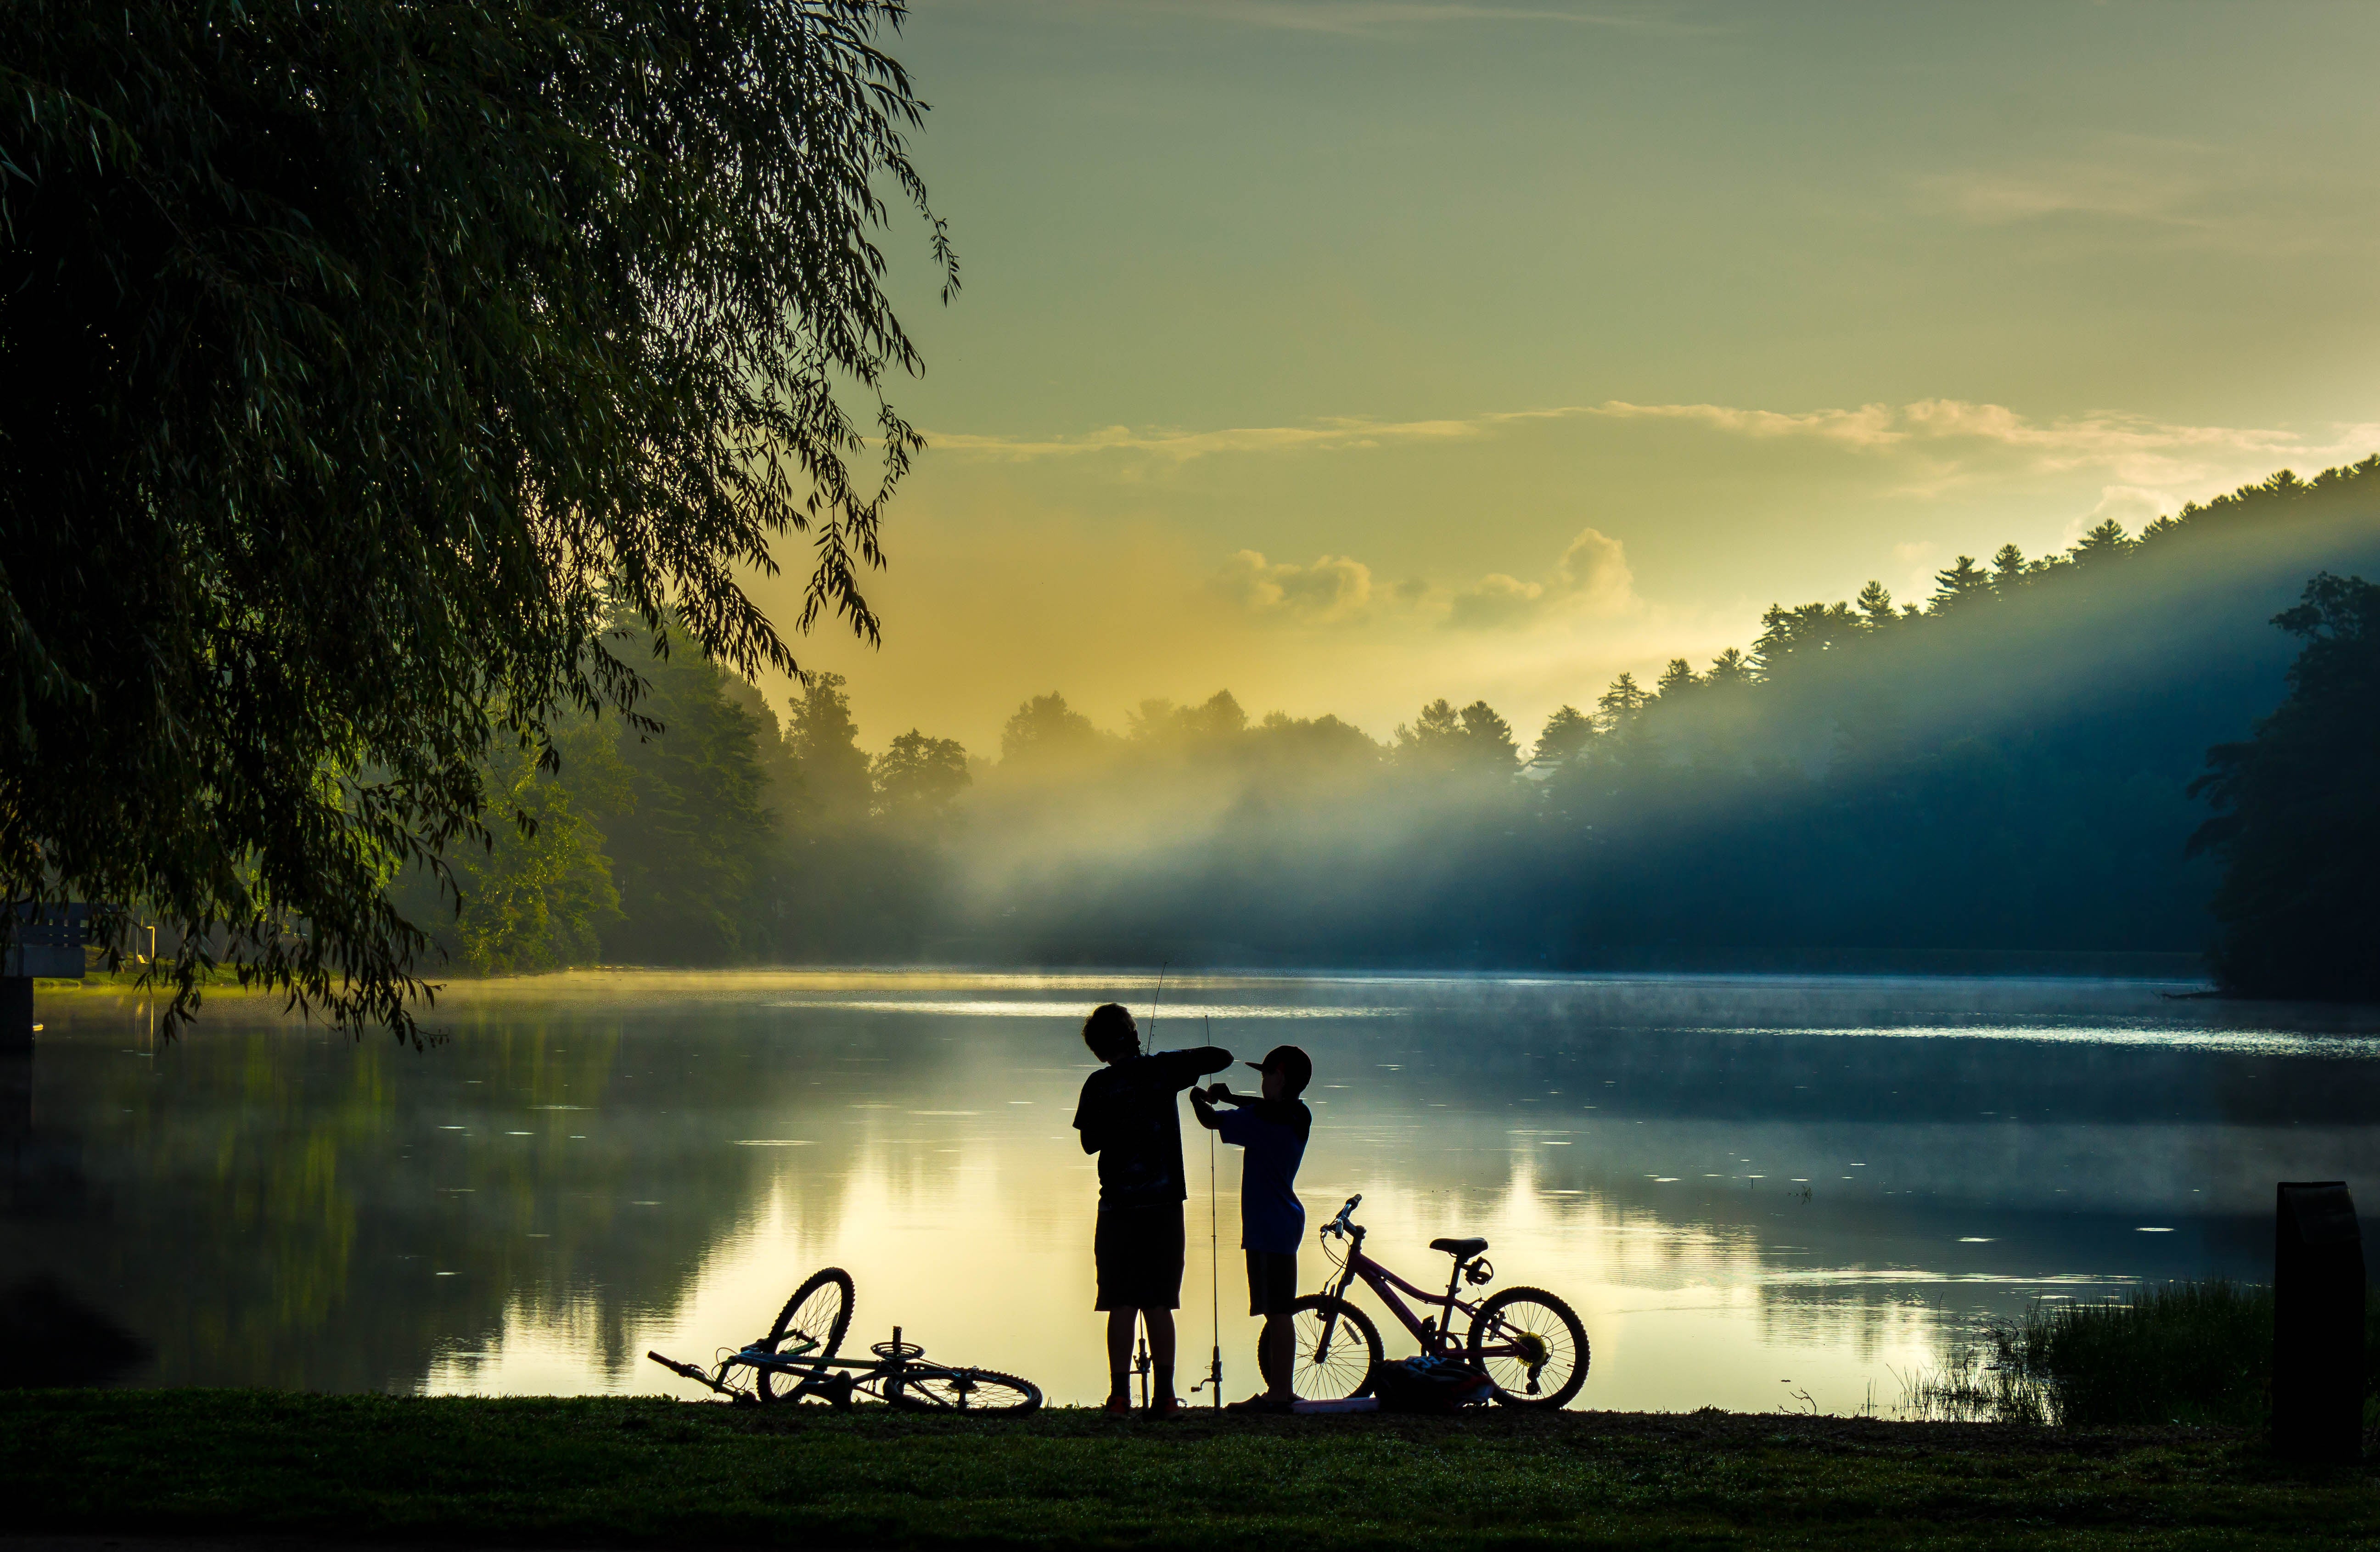 Silhouette of Two Kids on The Lake with Fishing Rods and Bikes